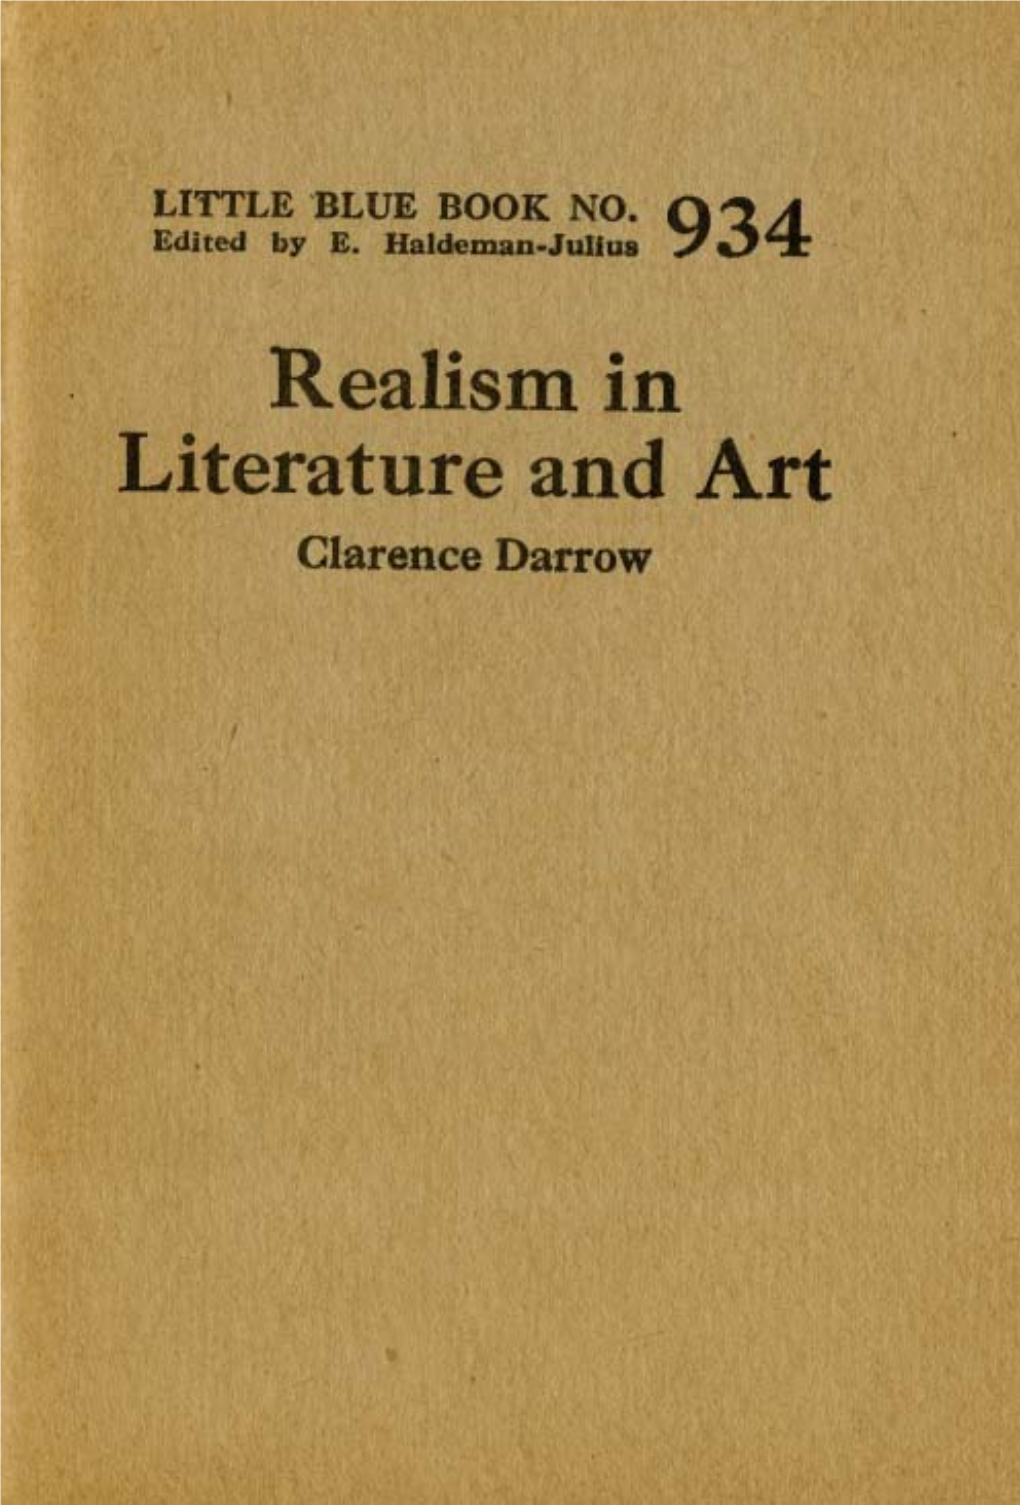 Realism in Literature and Art by Clarence